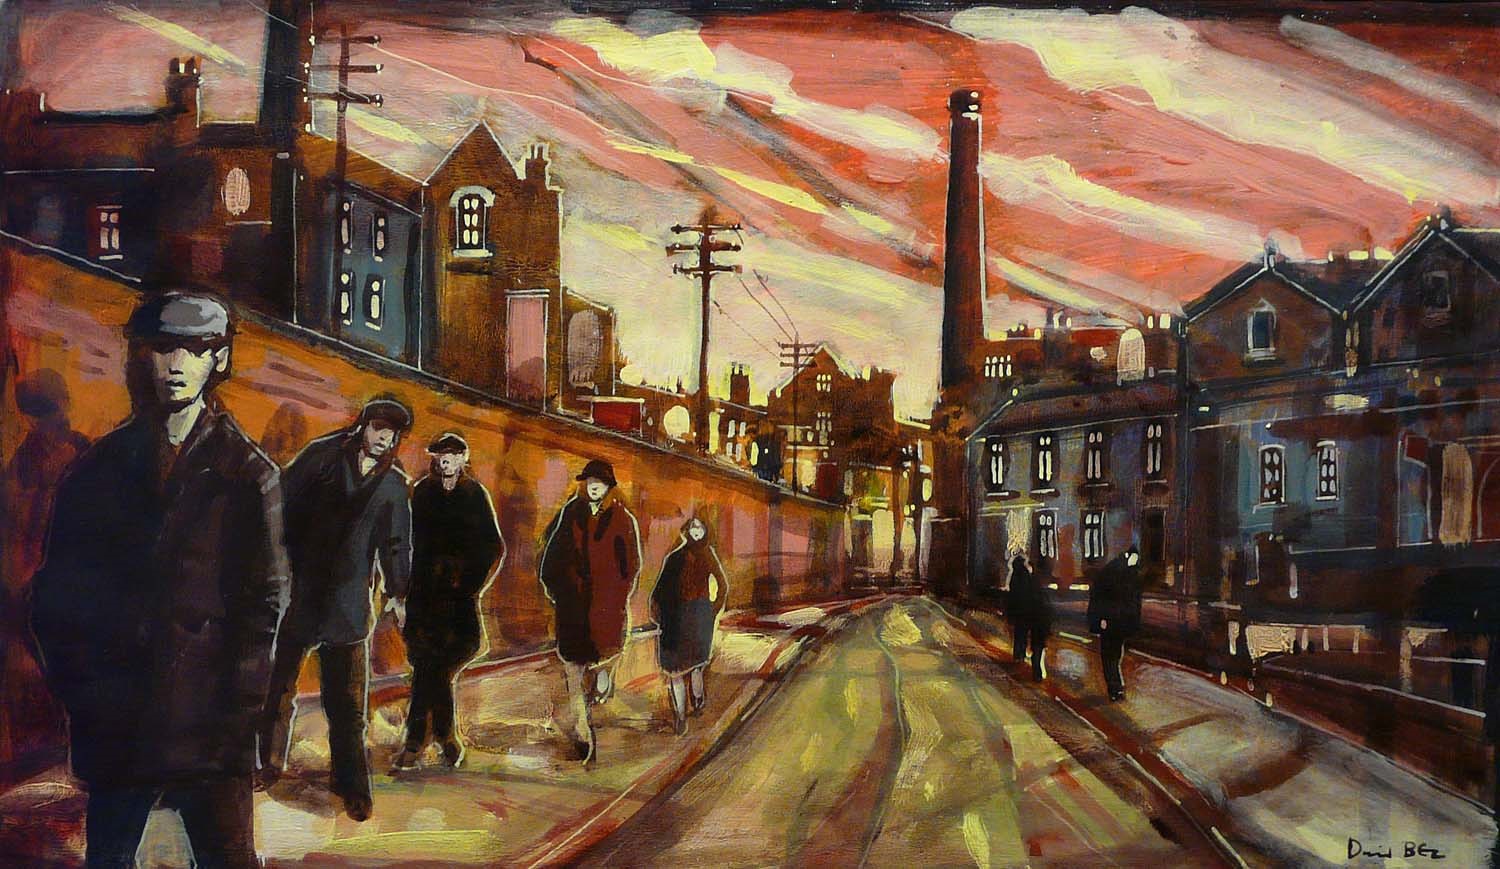 Streets of Gold by David Bez